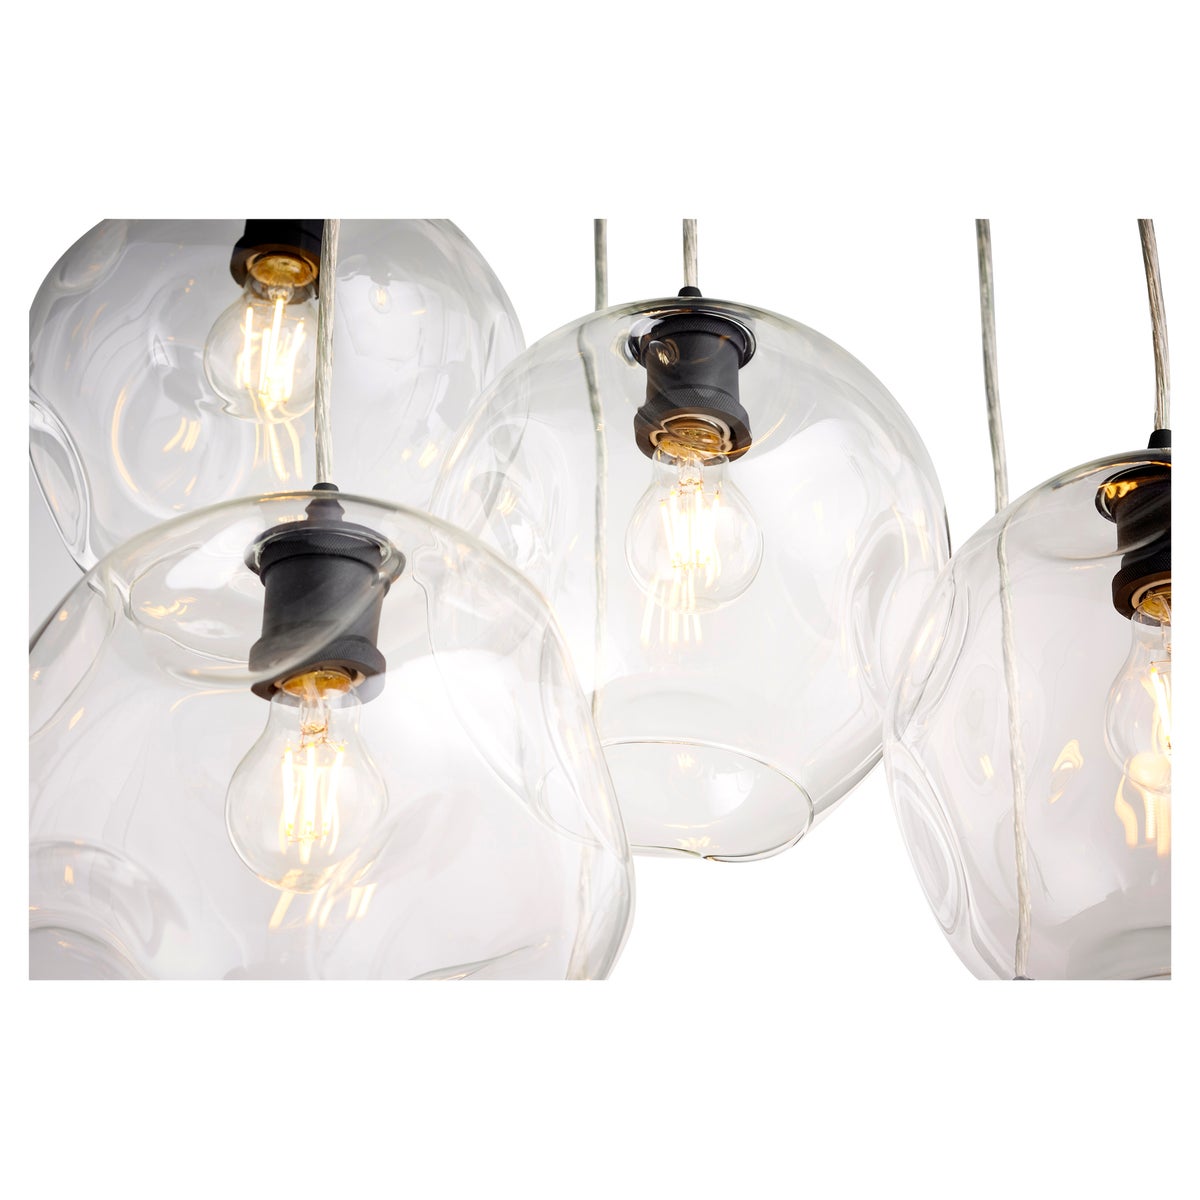 Cluster Pendant Light with clear glass globes and a light bulb in a glass container. Crafted of metal in a stylish finish, this contemporary light fixture features an adjustable cord and a wavy glass globe shade. Perfect for brightening your space.